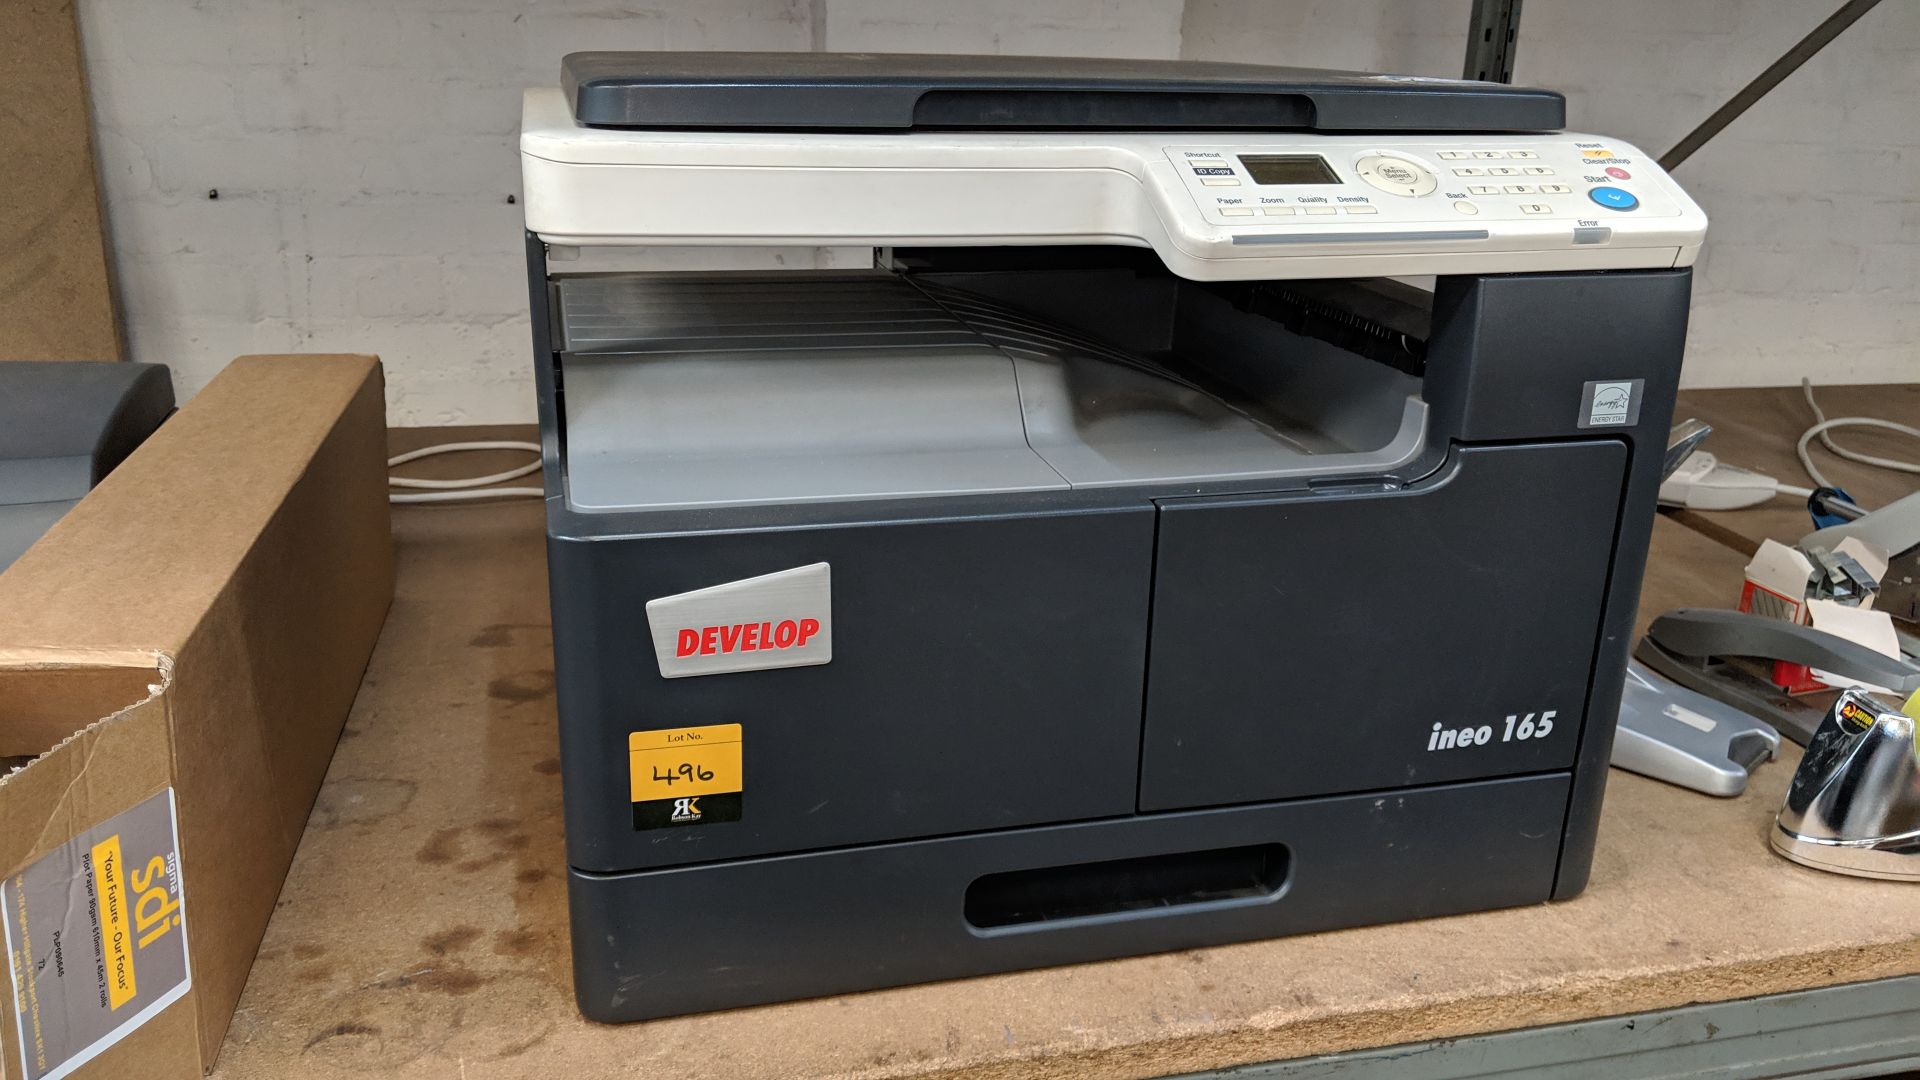 Develop ineo 165 printer This is one of a large number of lots in this sale being sold on behalf